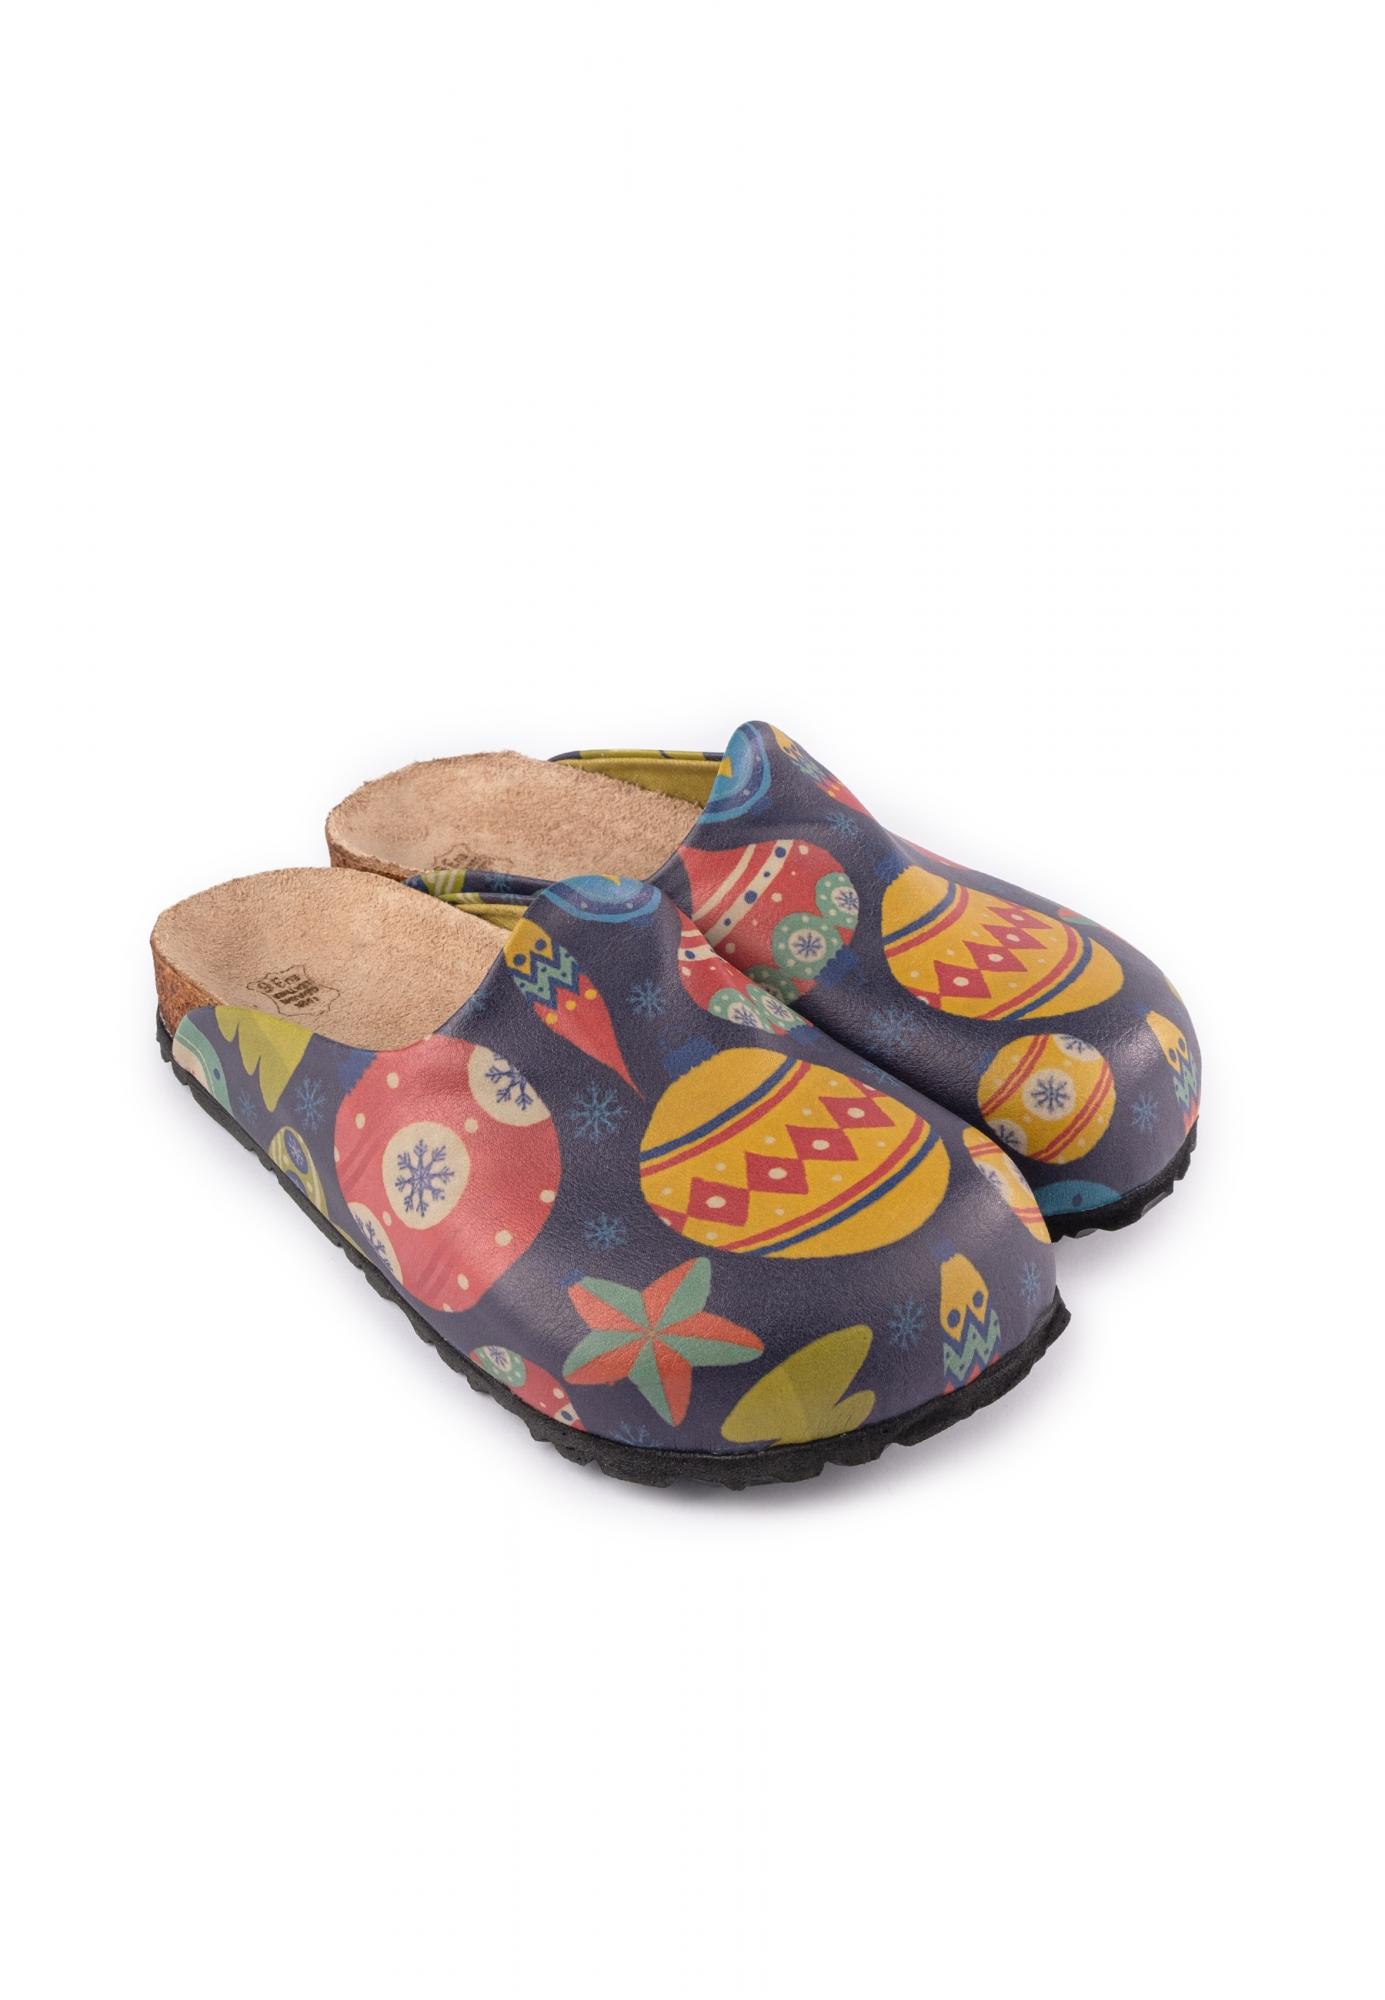 Patterned women clogs D271 - NEW YEAR - NAVY